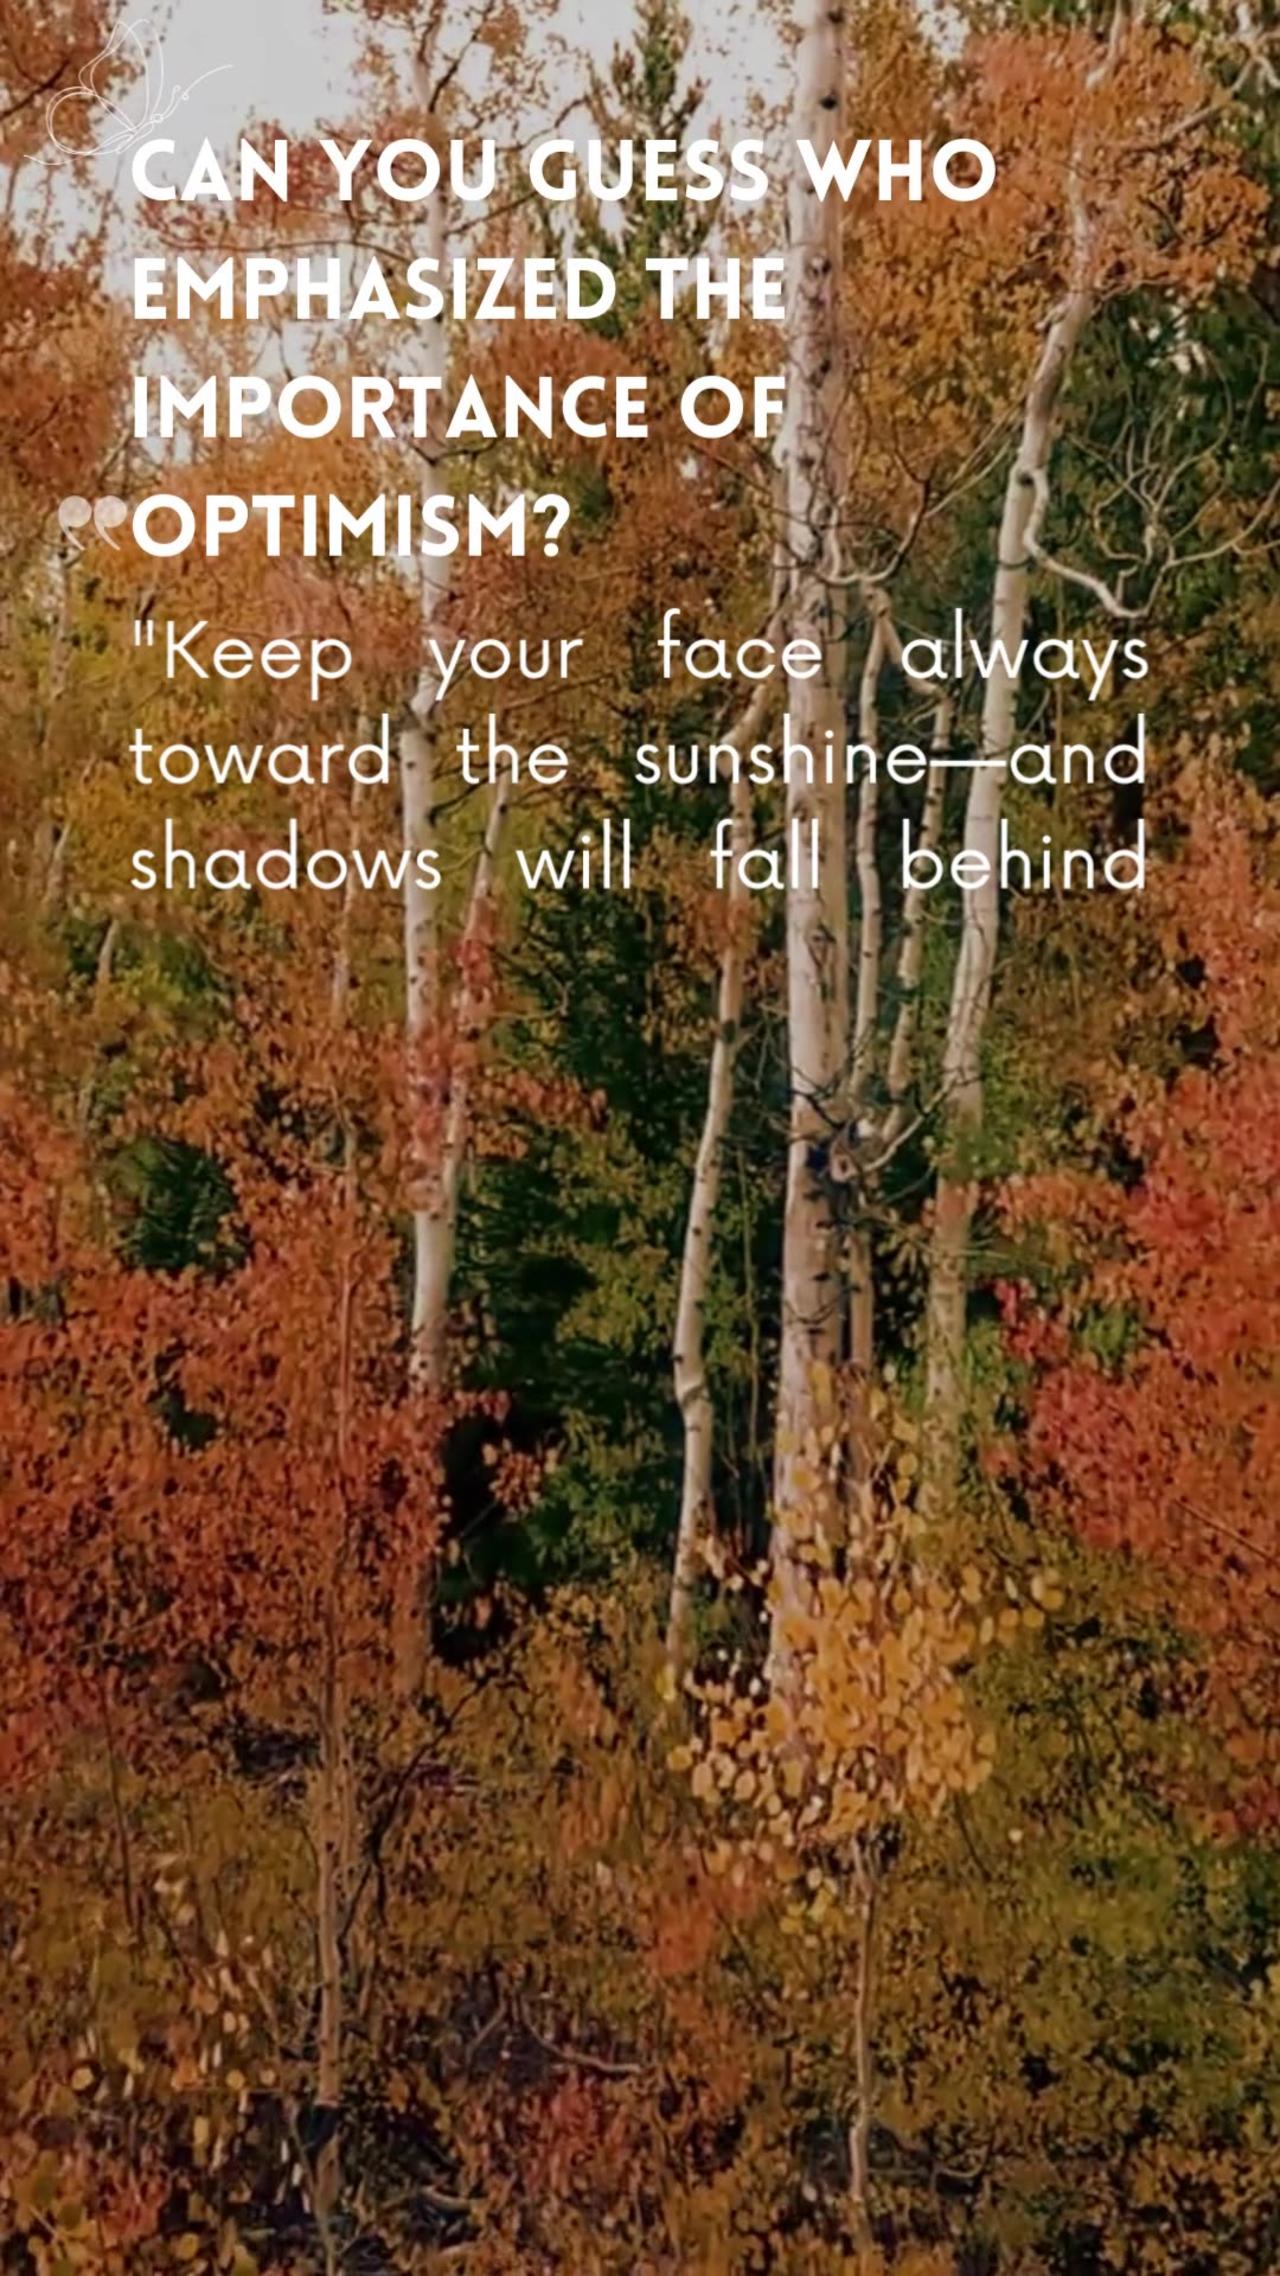 Can you guess who emphasized the importance of optimism?